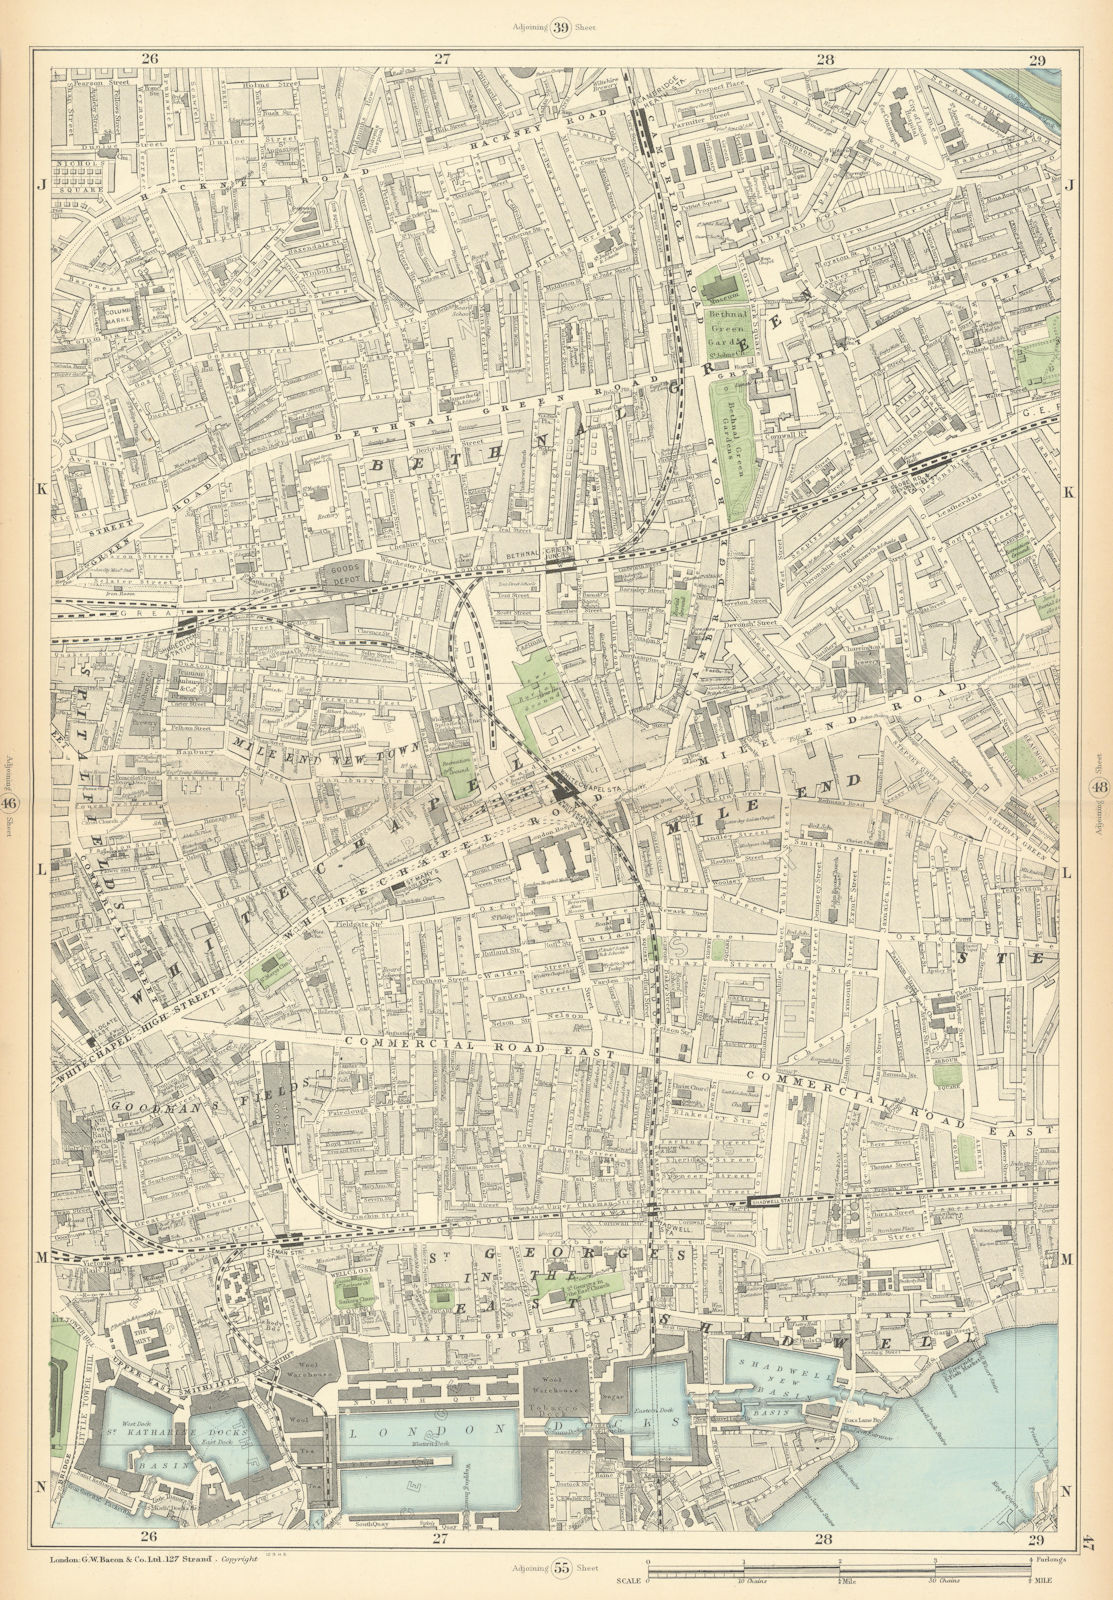 BETHNAL GREEN WHITECHAPEL Mile End Shadwell Wapping Stepney Shoreditch 1900 map